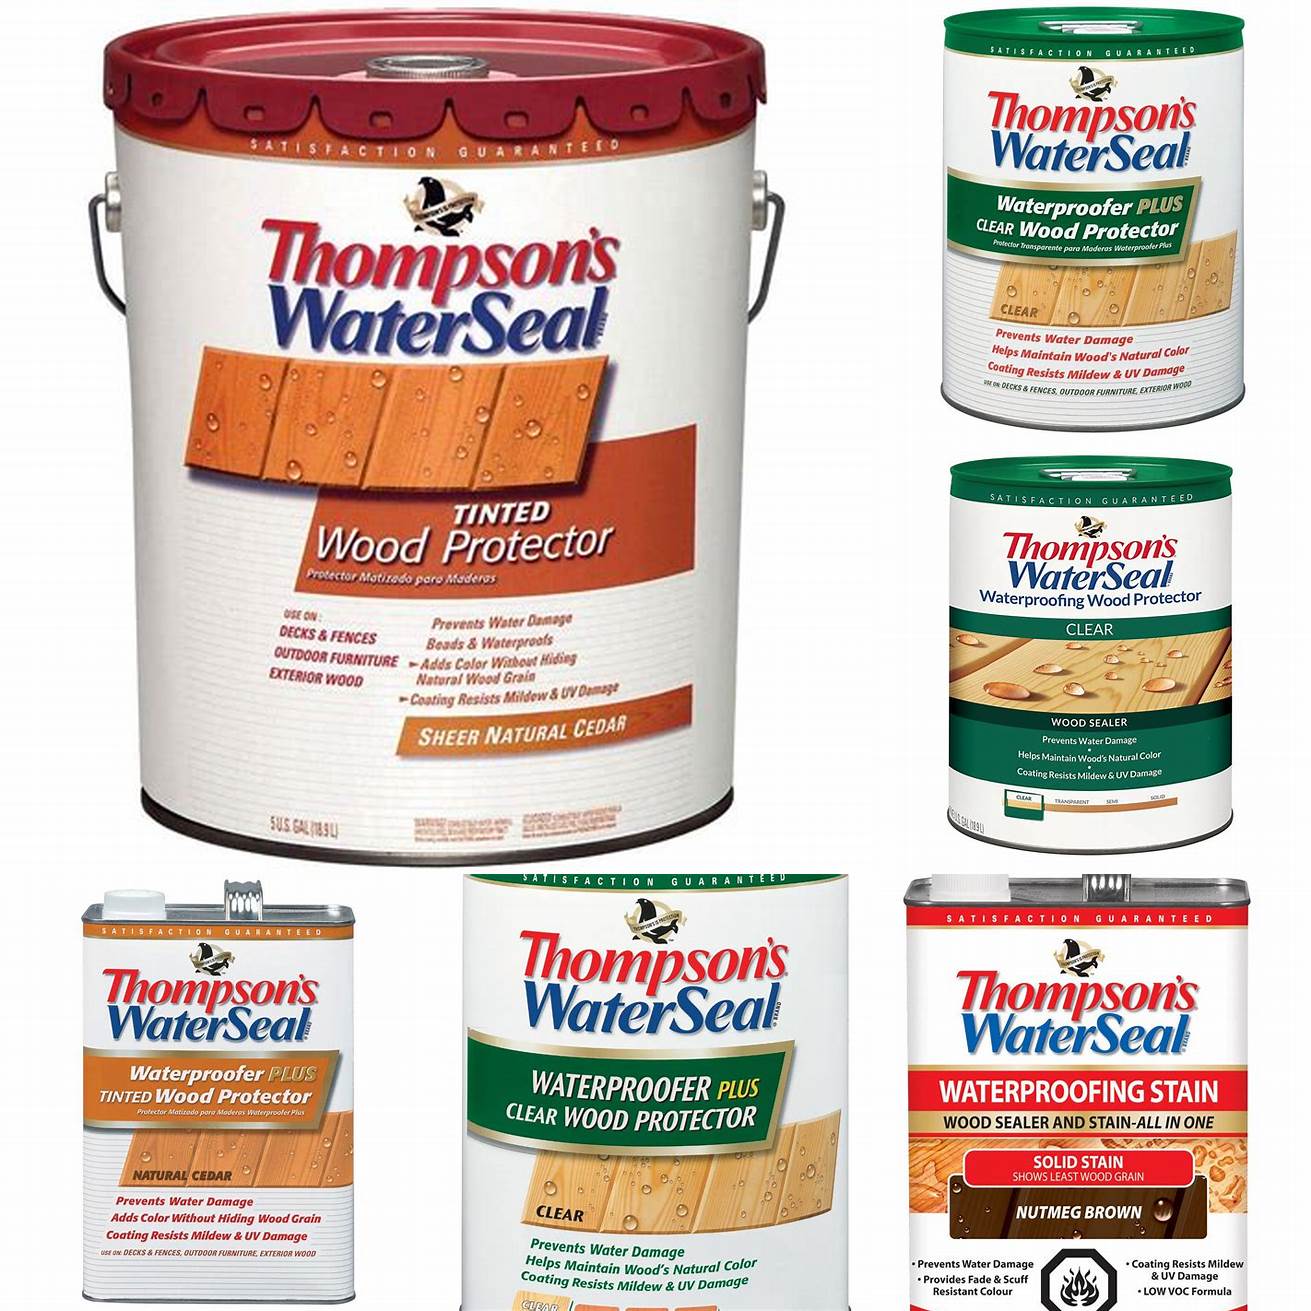 Thompsons WaterSeal Advanced Natural Wood Protector Cabot Water-Based Deck Siding Stain Tall Earth Eco-Safe Wood Treatment Rust-Oleum Varathane Fast Dry Wood Stain Ready Seal Natural Cedar Exterior Stain and Sealer Minwax Wood Finish Stain Marker Tall Earth Eco-Safe Wood Treatment Penofin Marine Oil Wood Finish DEFY Extreme Exterior Wood Stain Ready Seal Mahogany Exterior Stain and Sealer